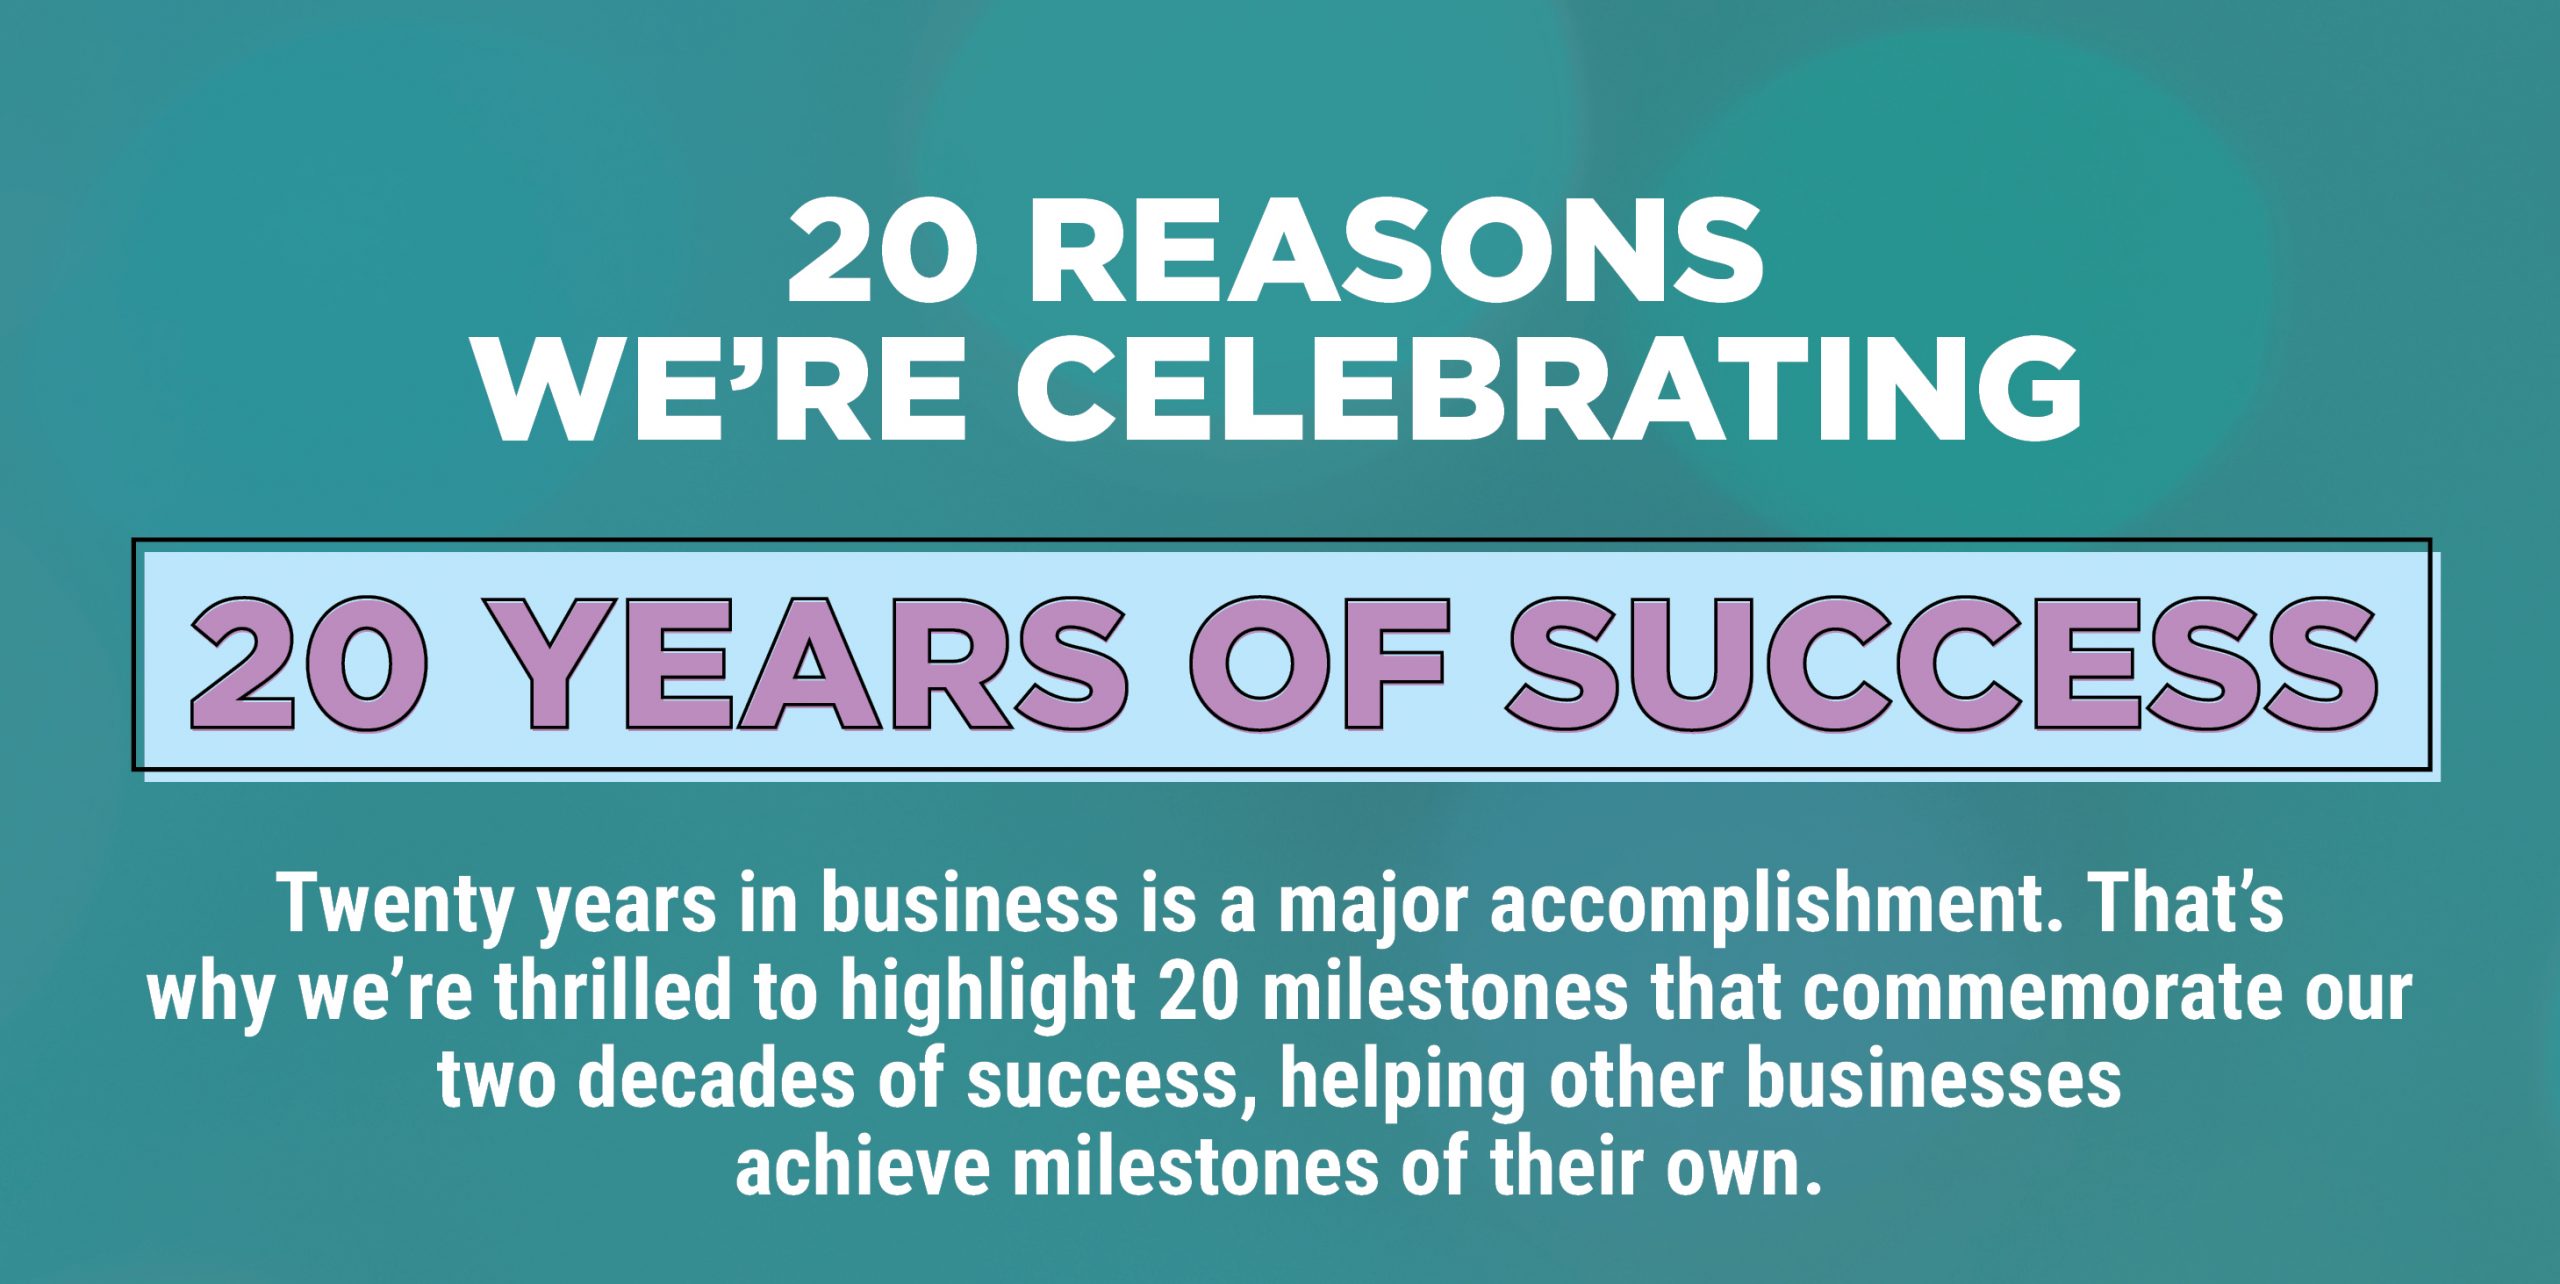 20 Reasons We're Celebrating 20 Years of Success